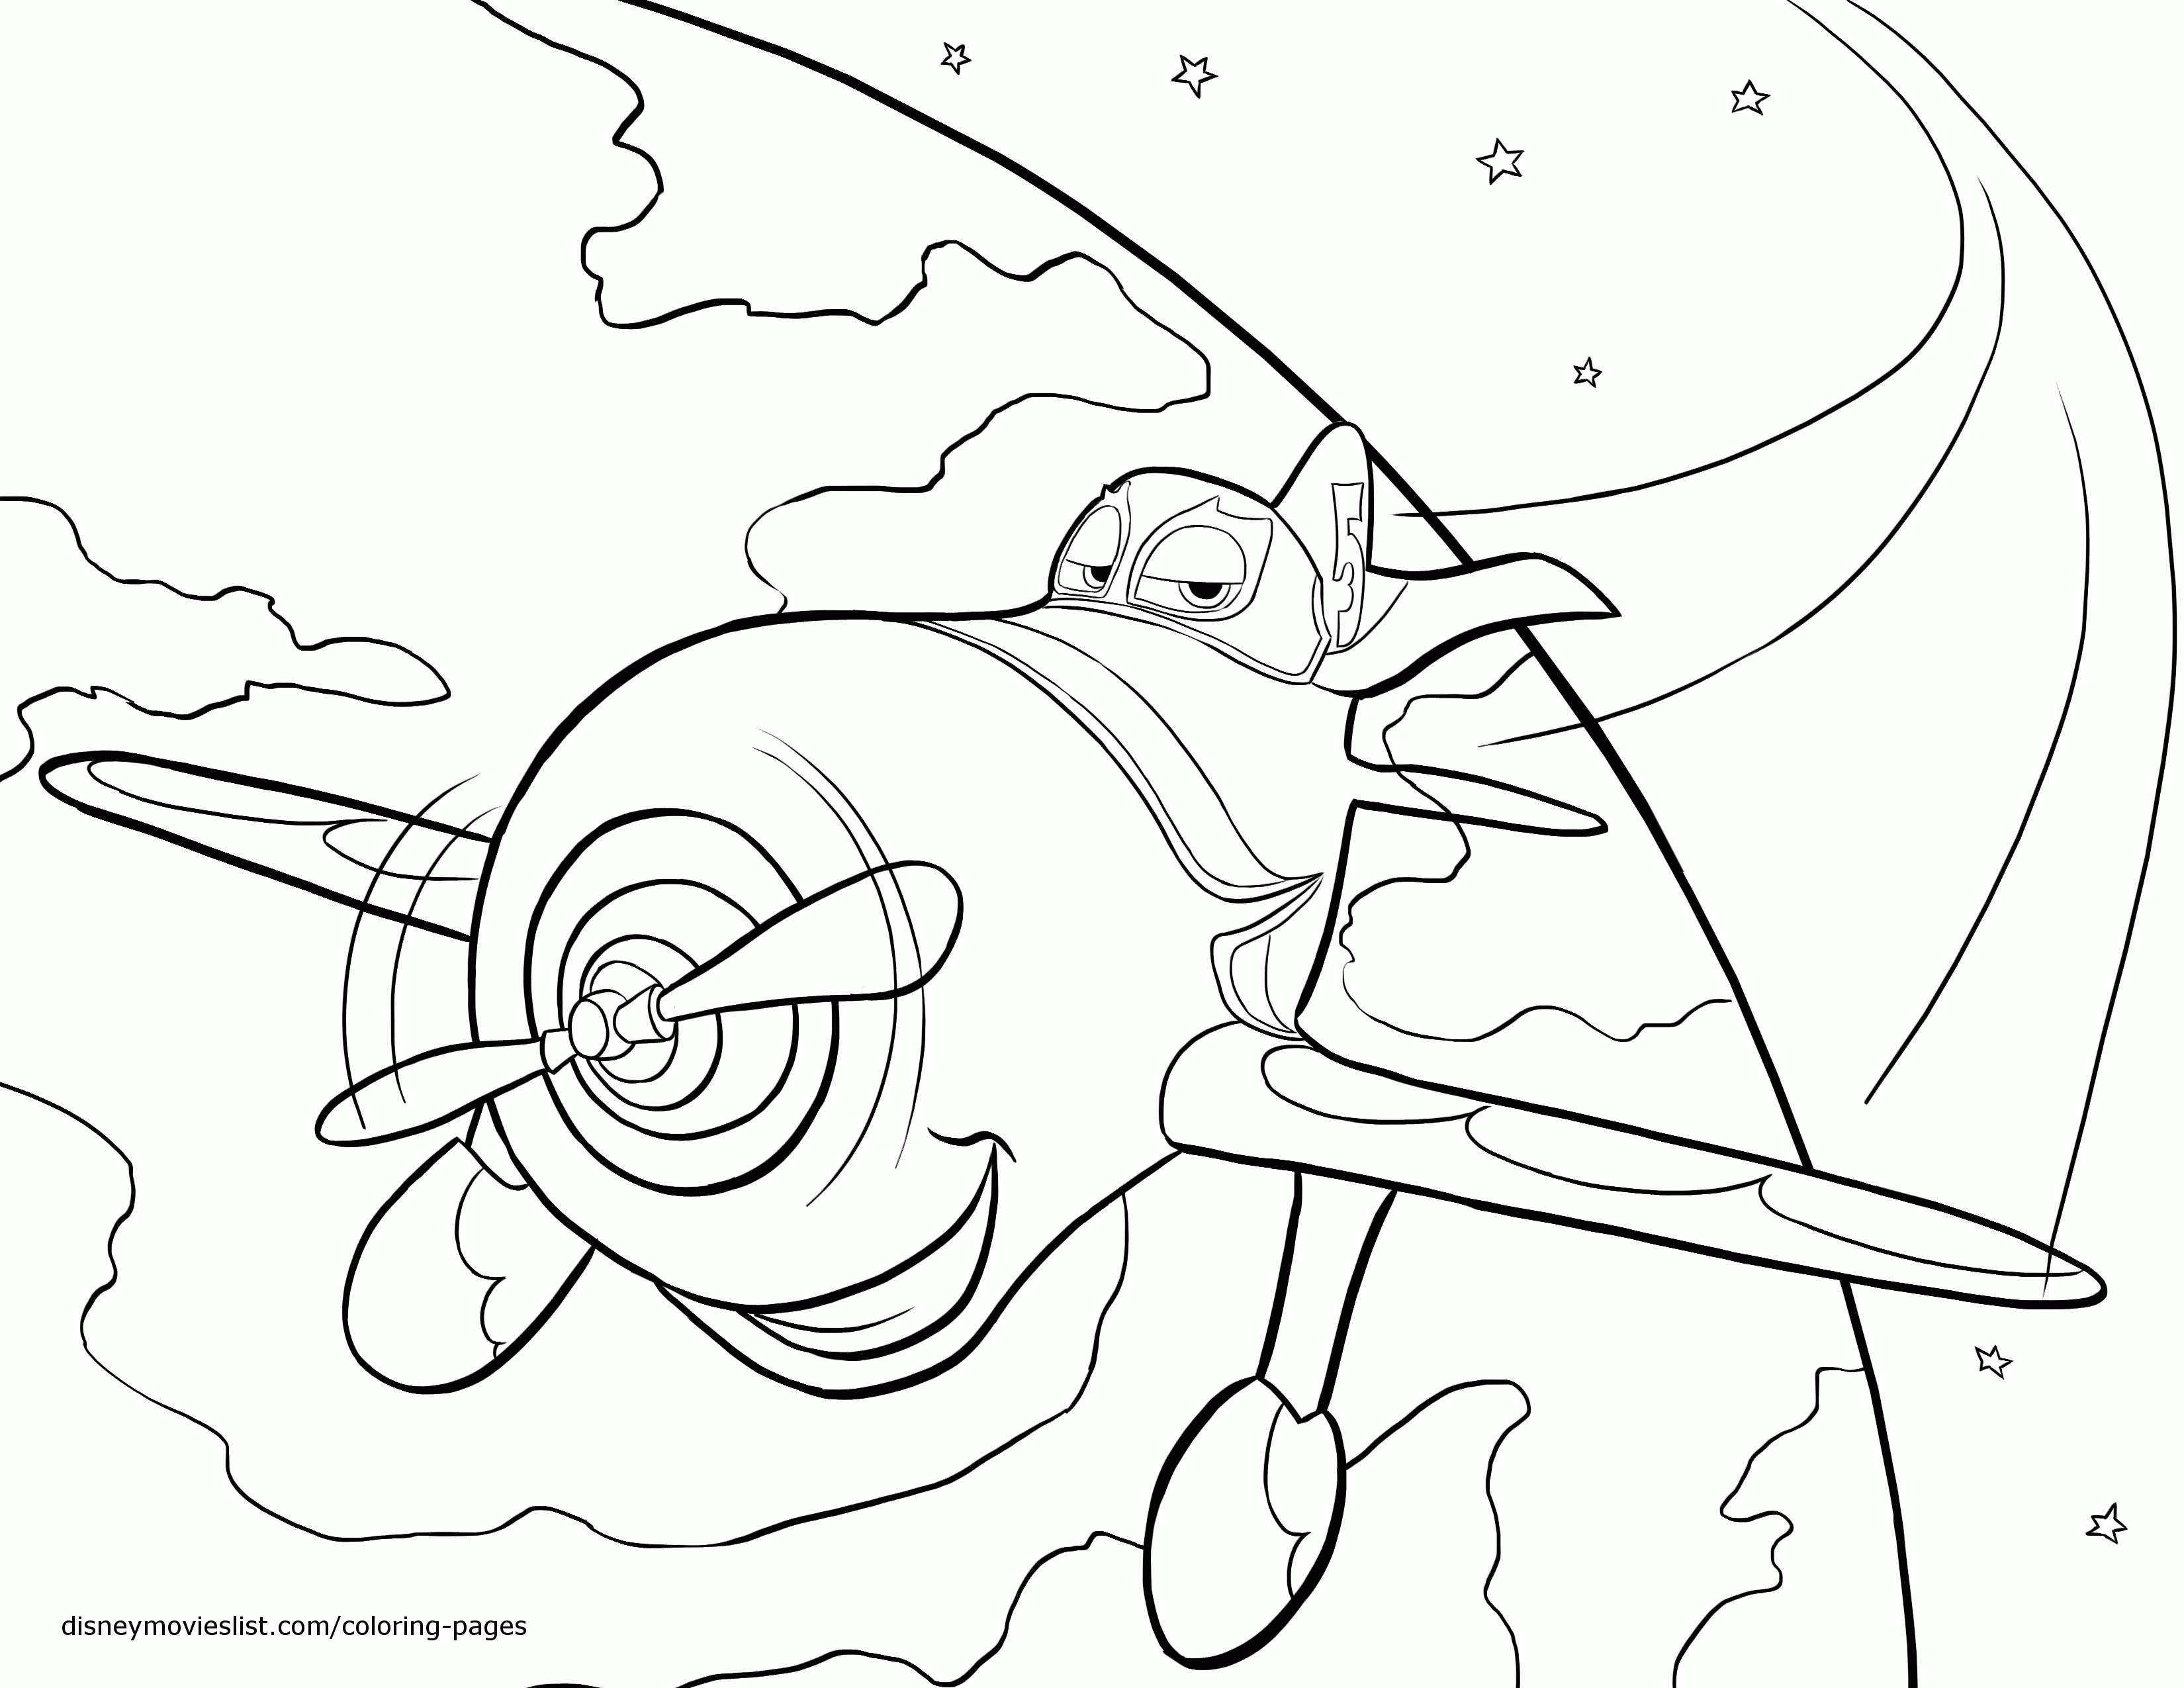 Disney Movie - Coloring Pages for Kids and for Adults